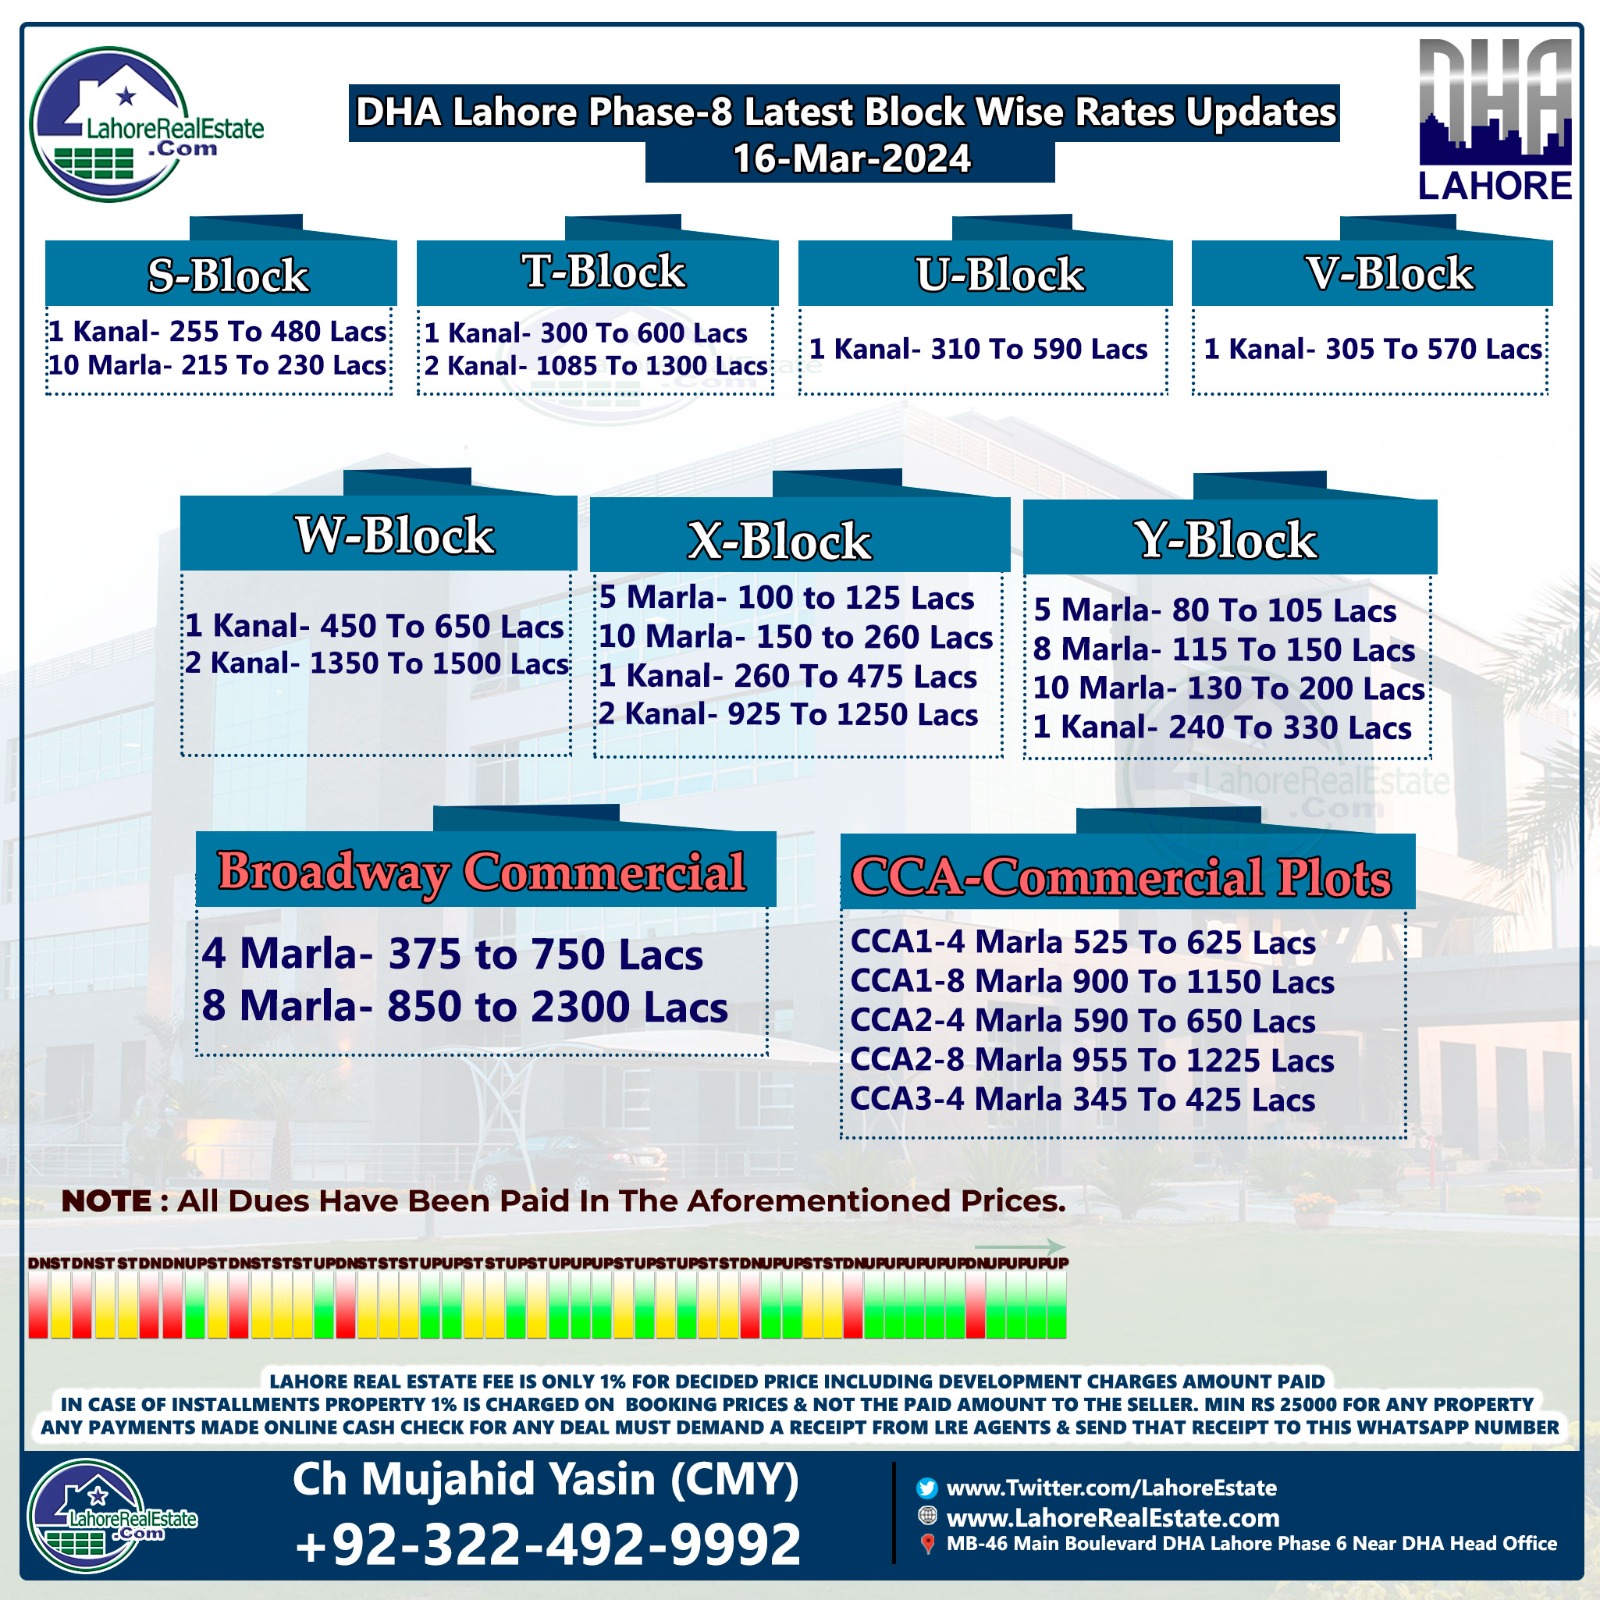 DHA Lahore Phase 8 Plot Prices Update March 18, 2024